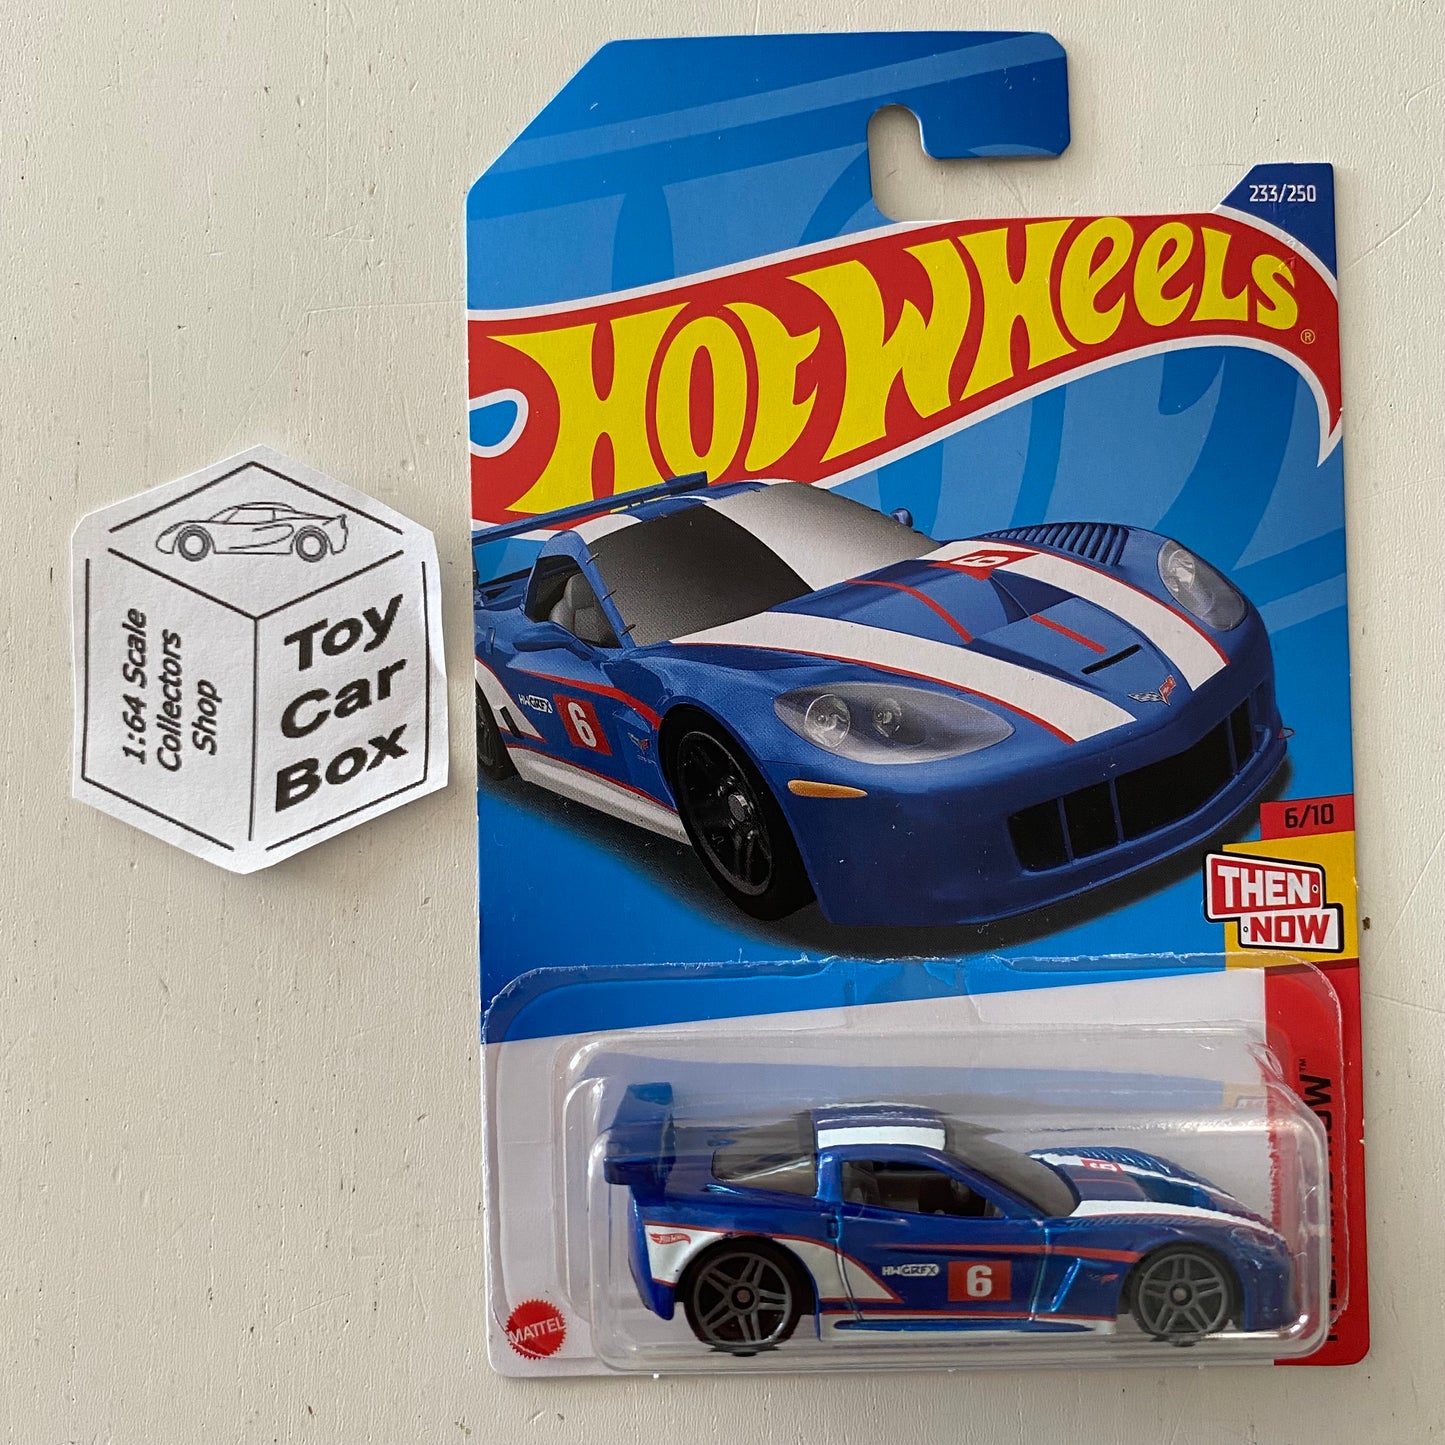 2022 HOT WHEELS #233 - Chevy Corvette C6R (Blue #6 Then And Now - Long Card) B00